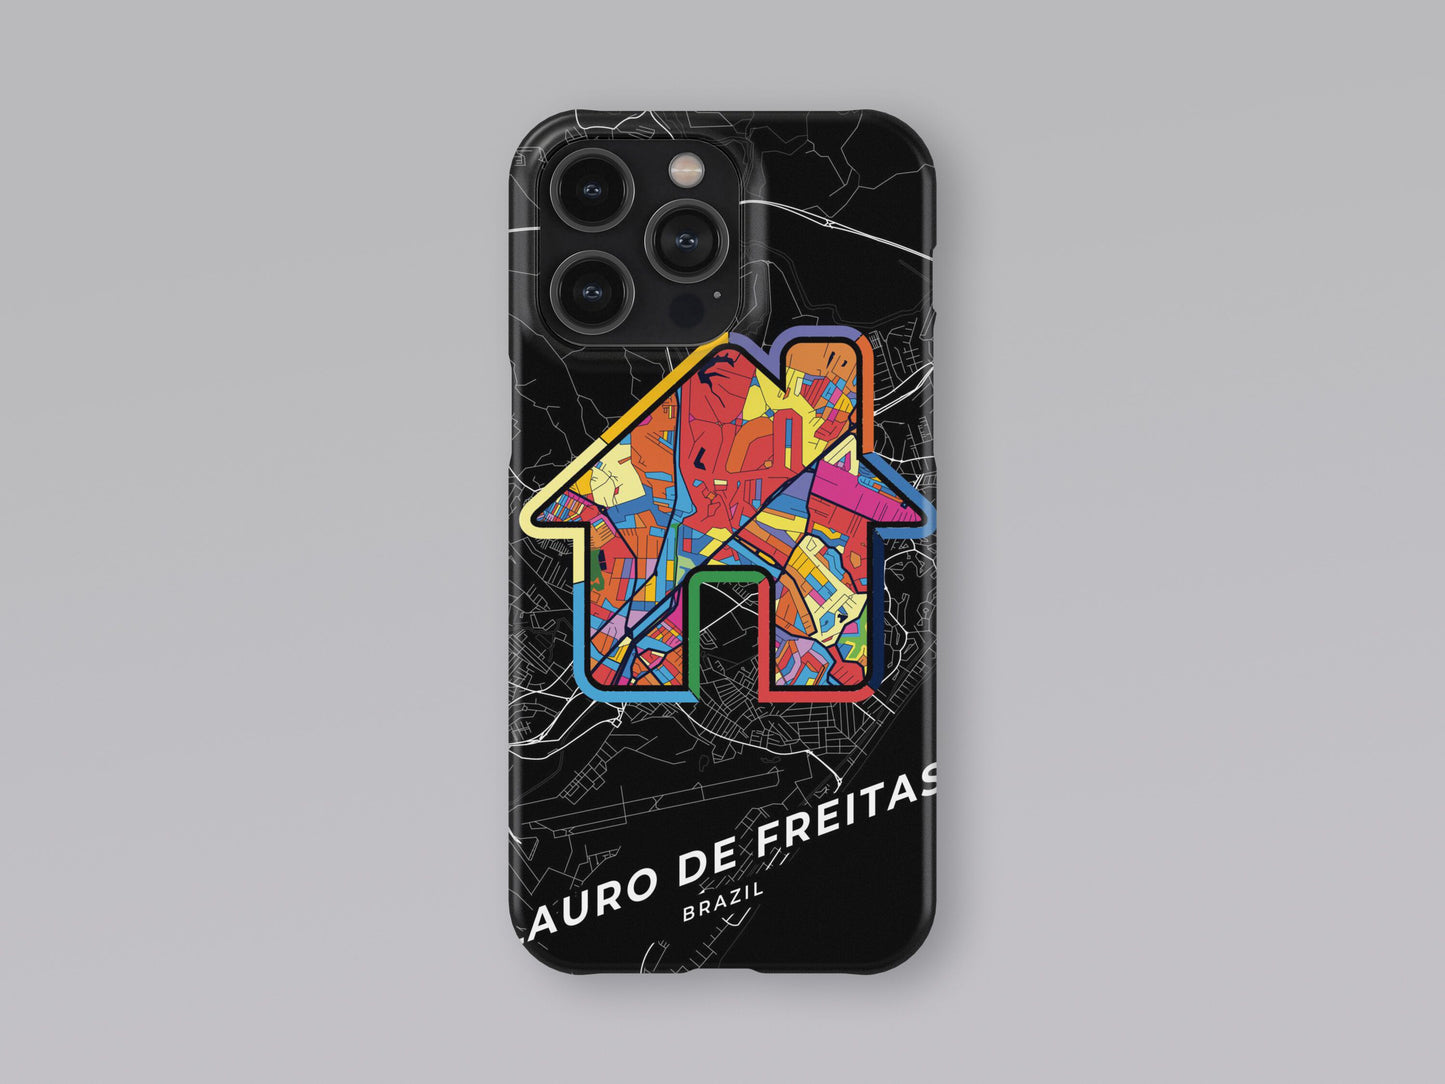 Lauro De Freitas Brazil slim phone case with colorful icon. Birthday, wedding or housewarming gift. Couple match cases. 3